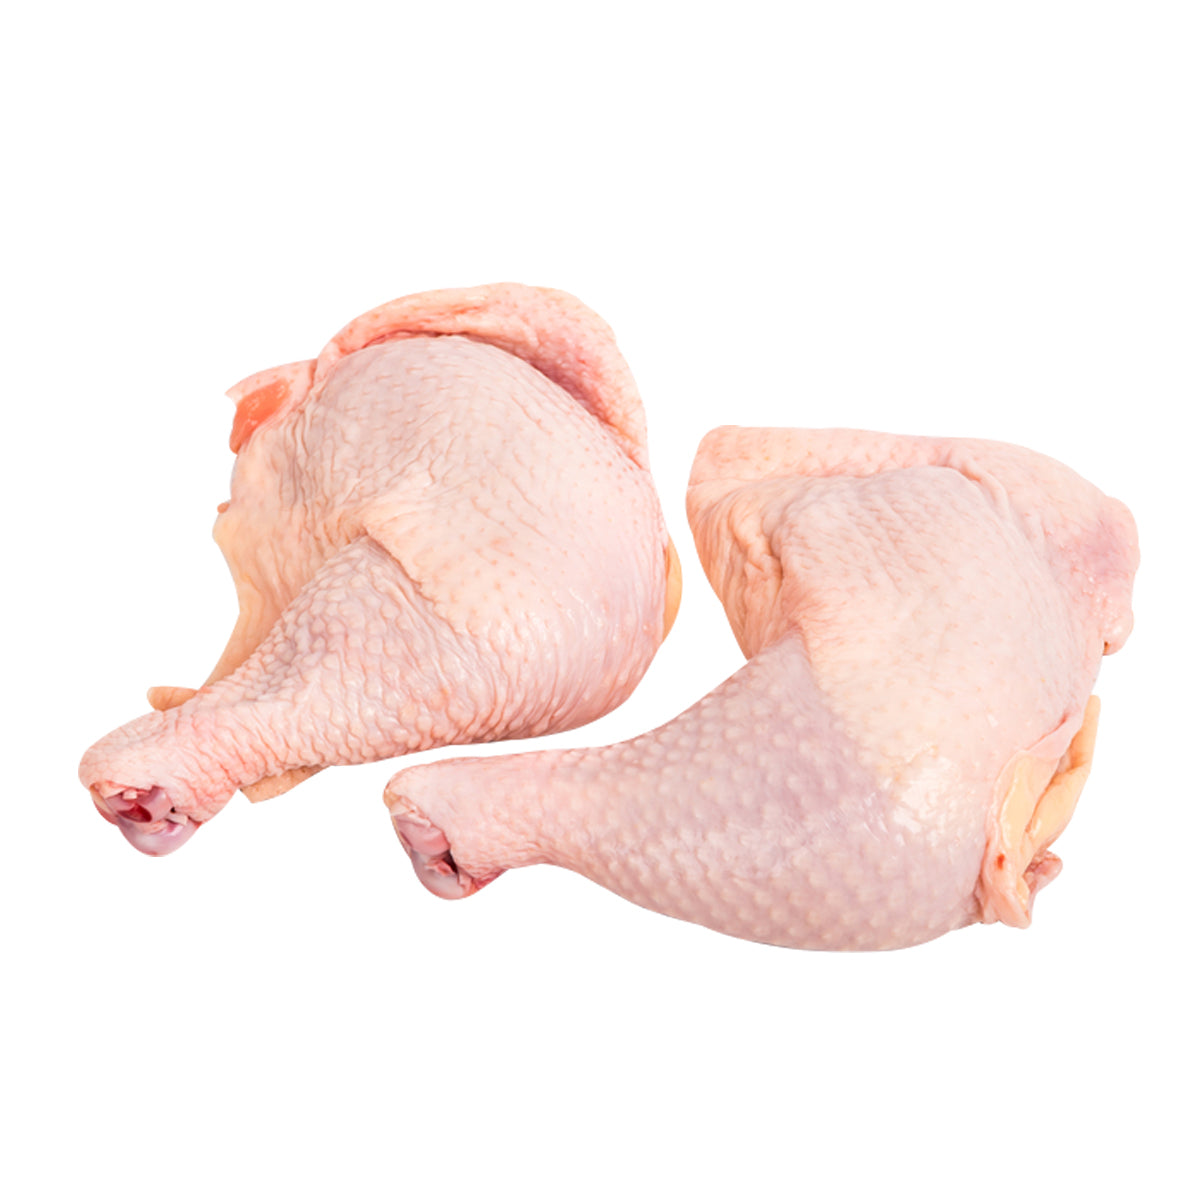 Joyce Farms Air-Chilled Poulet Rouge Skin On Chicken Legs